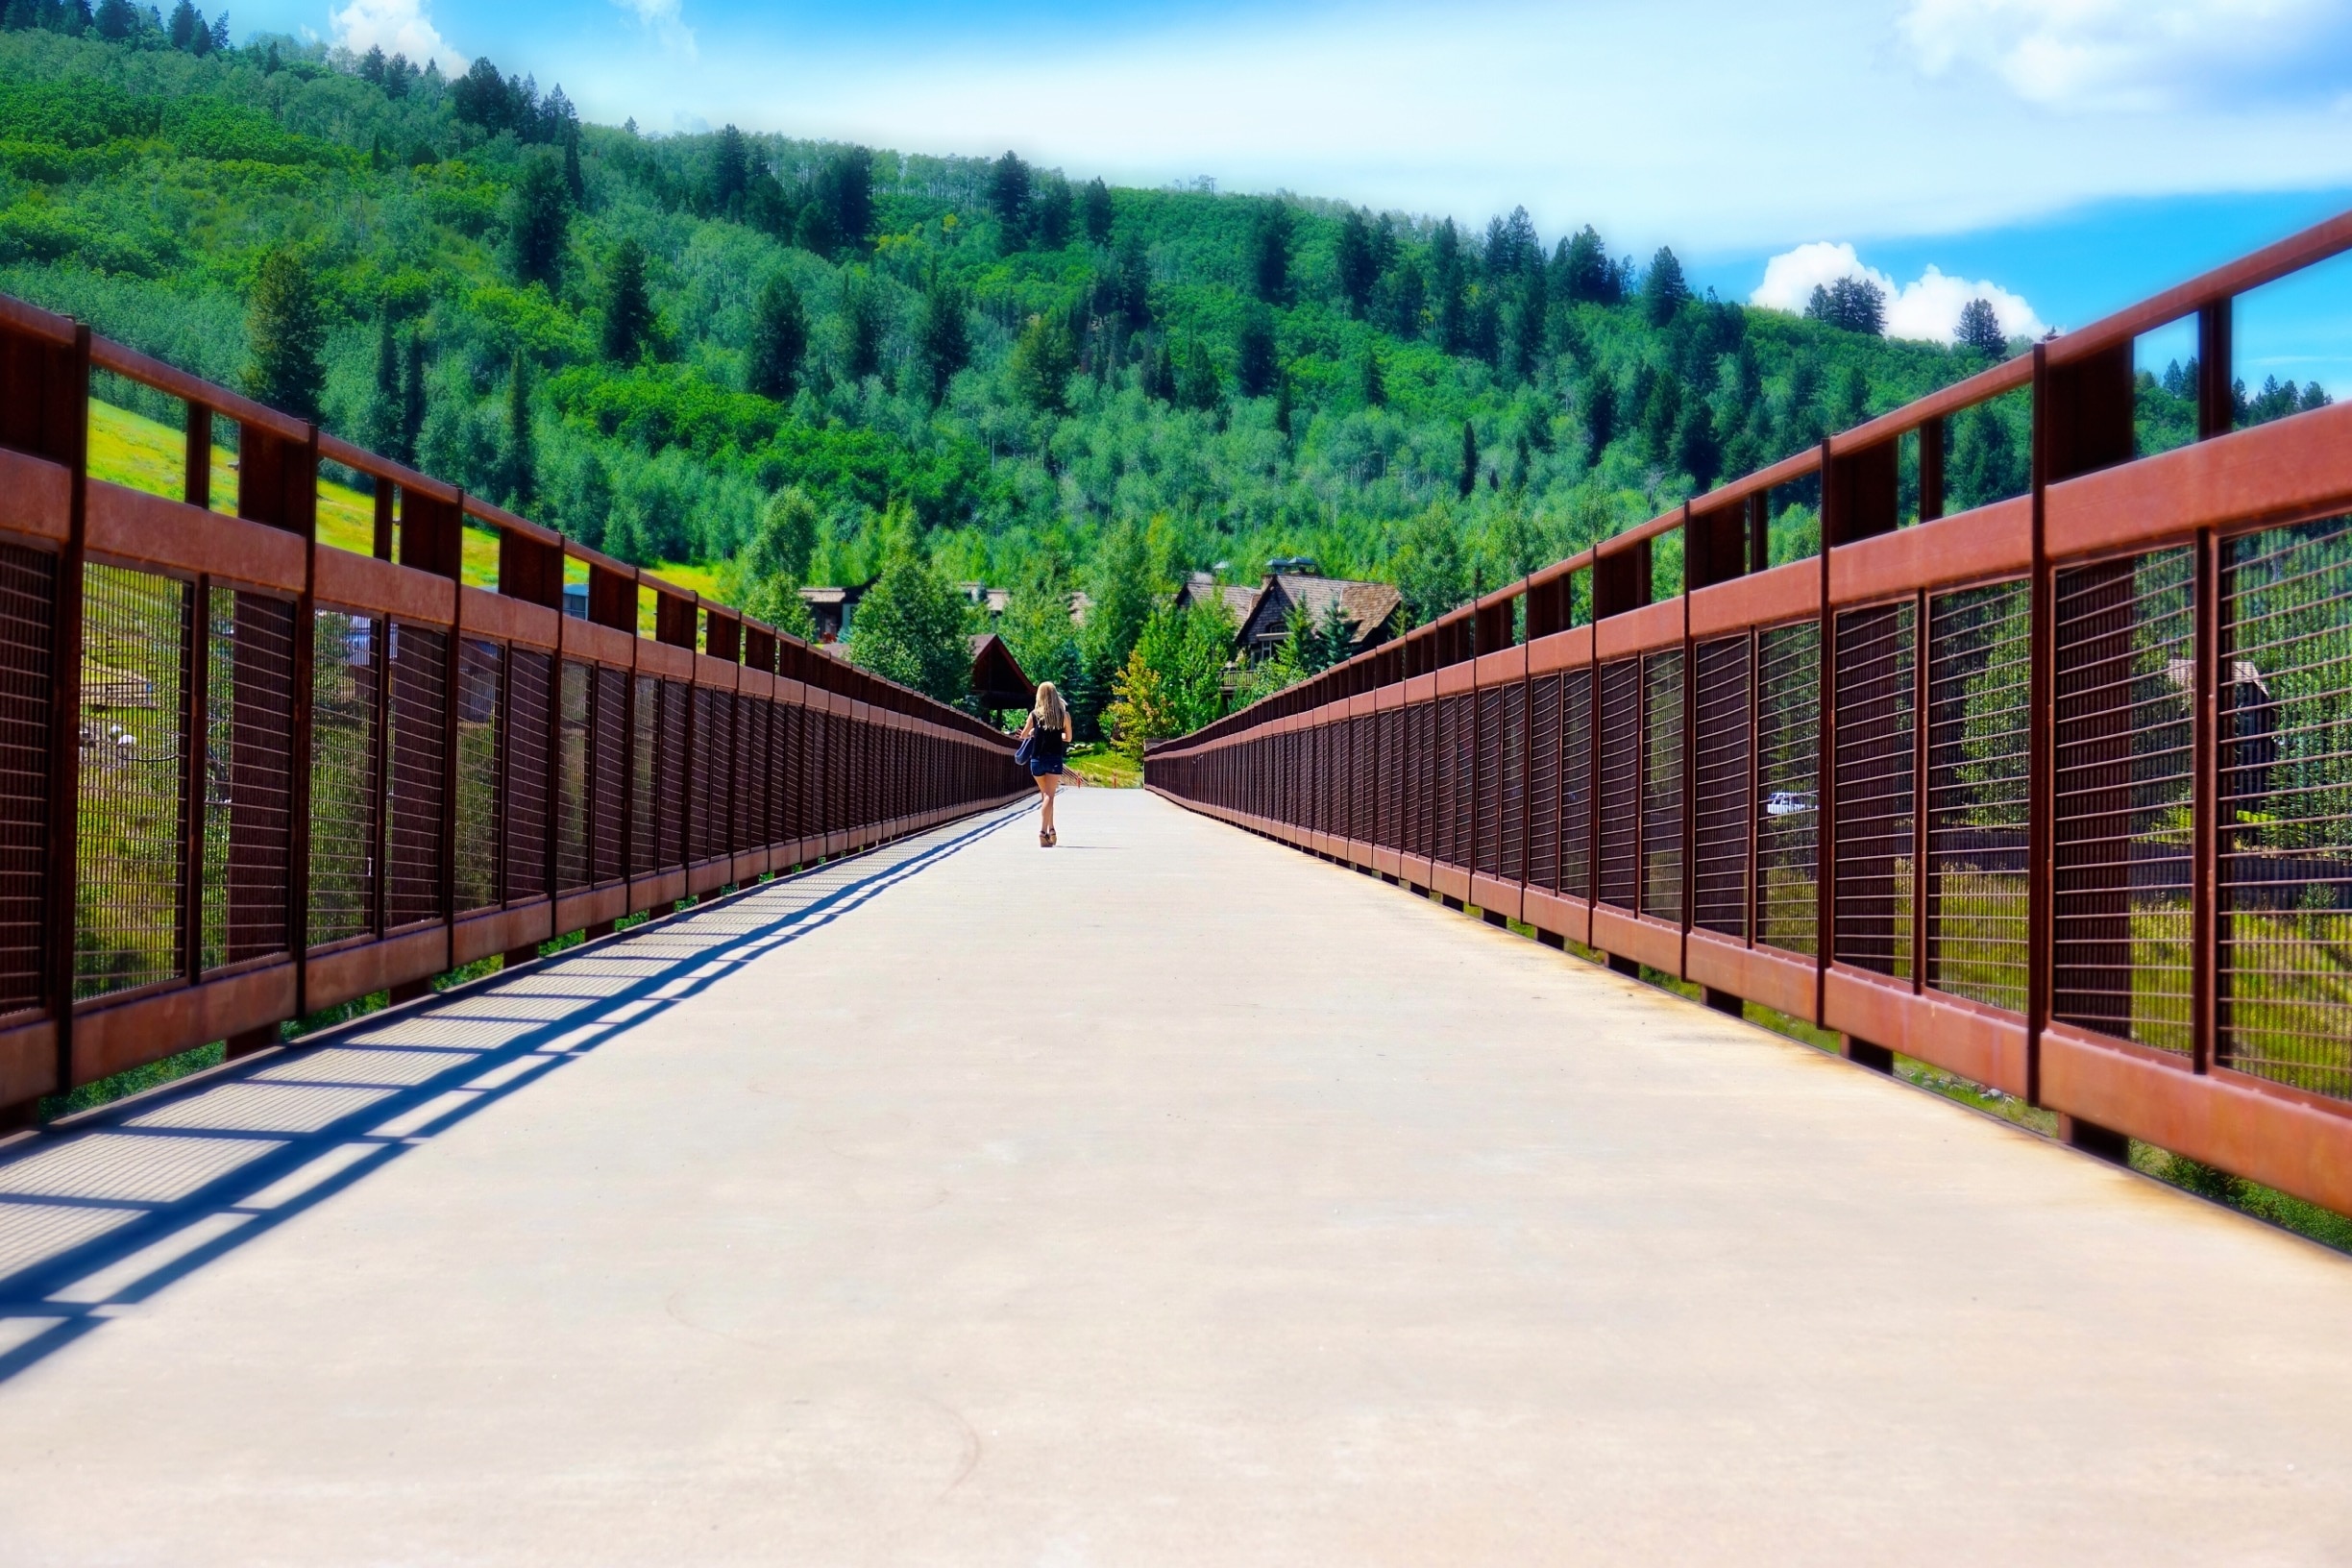 Aspen Colorado in the summer is beautiful, with plenty of hiking and biking trails.  Beginners can enjoy well kept, paved paths including this bridge over Maroon Creek near the Aspen Recreation Center.  #takeahike #perspectives